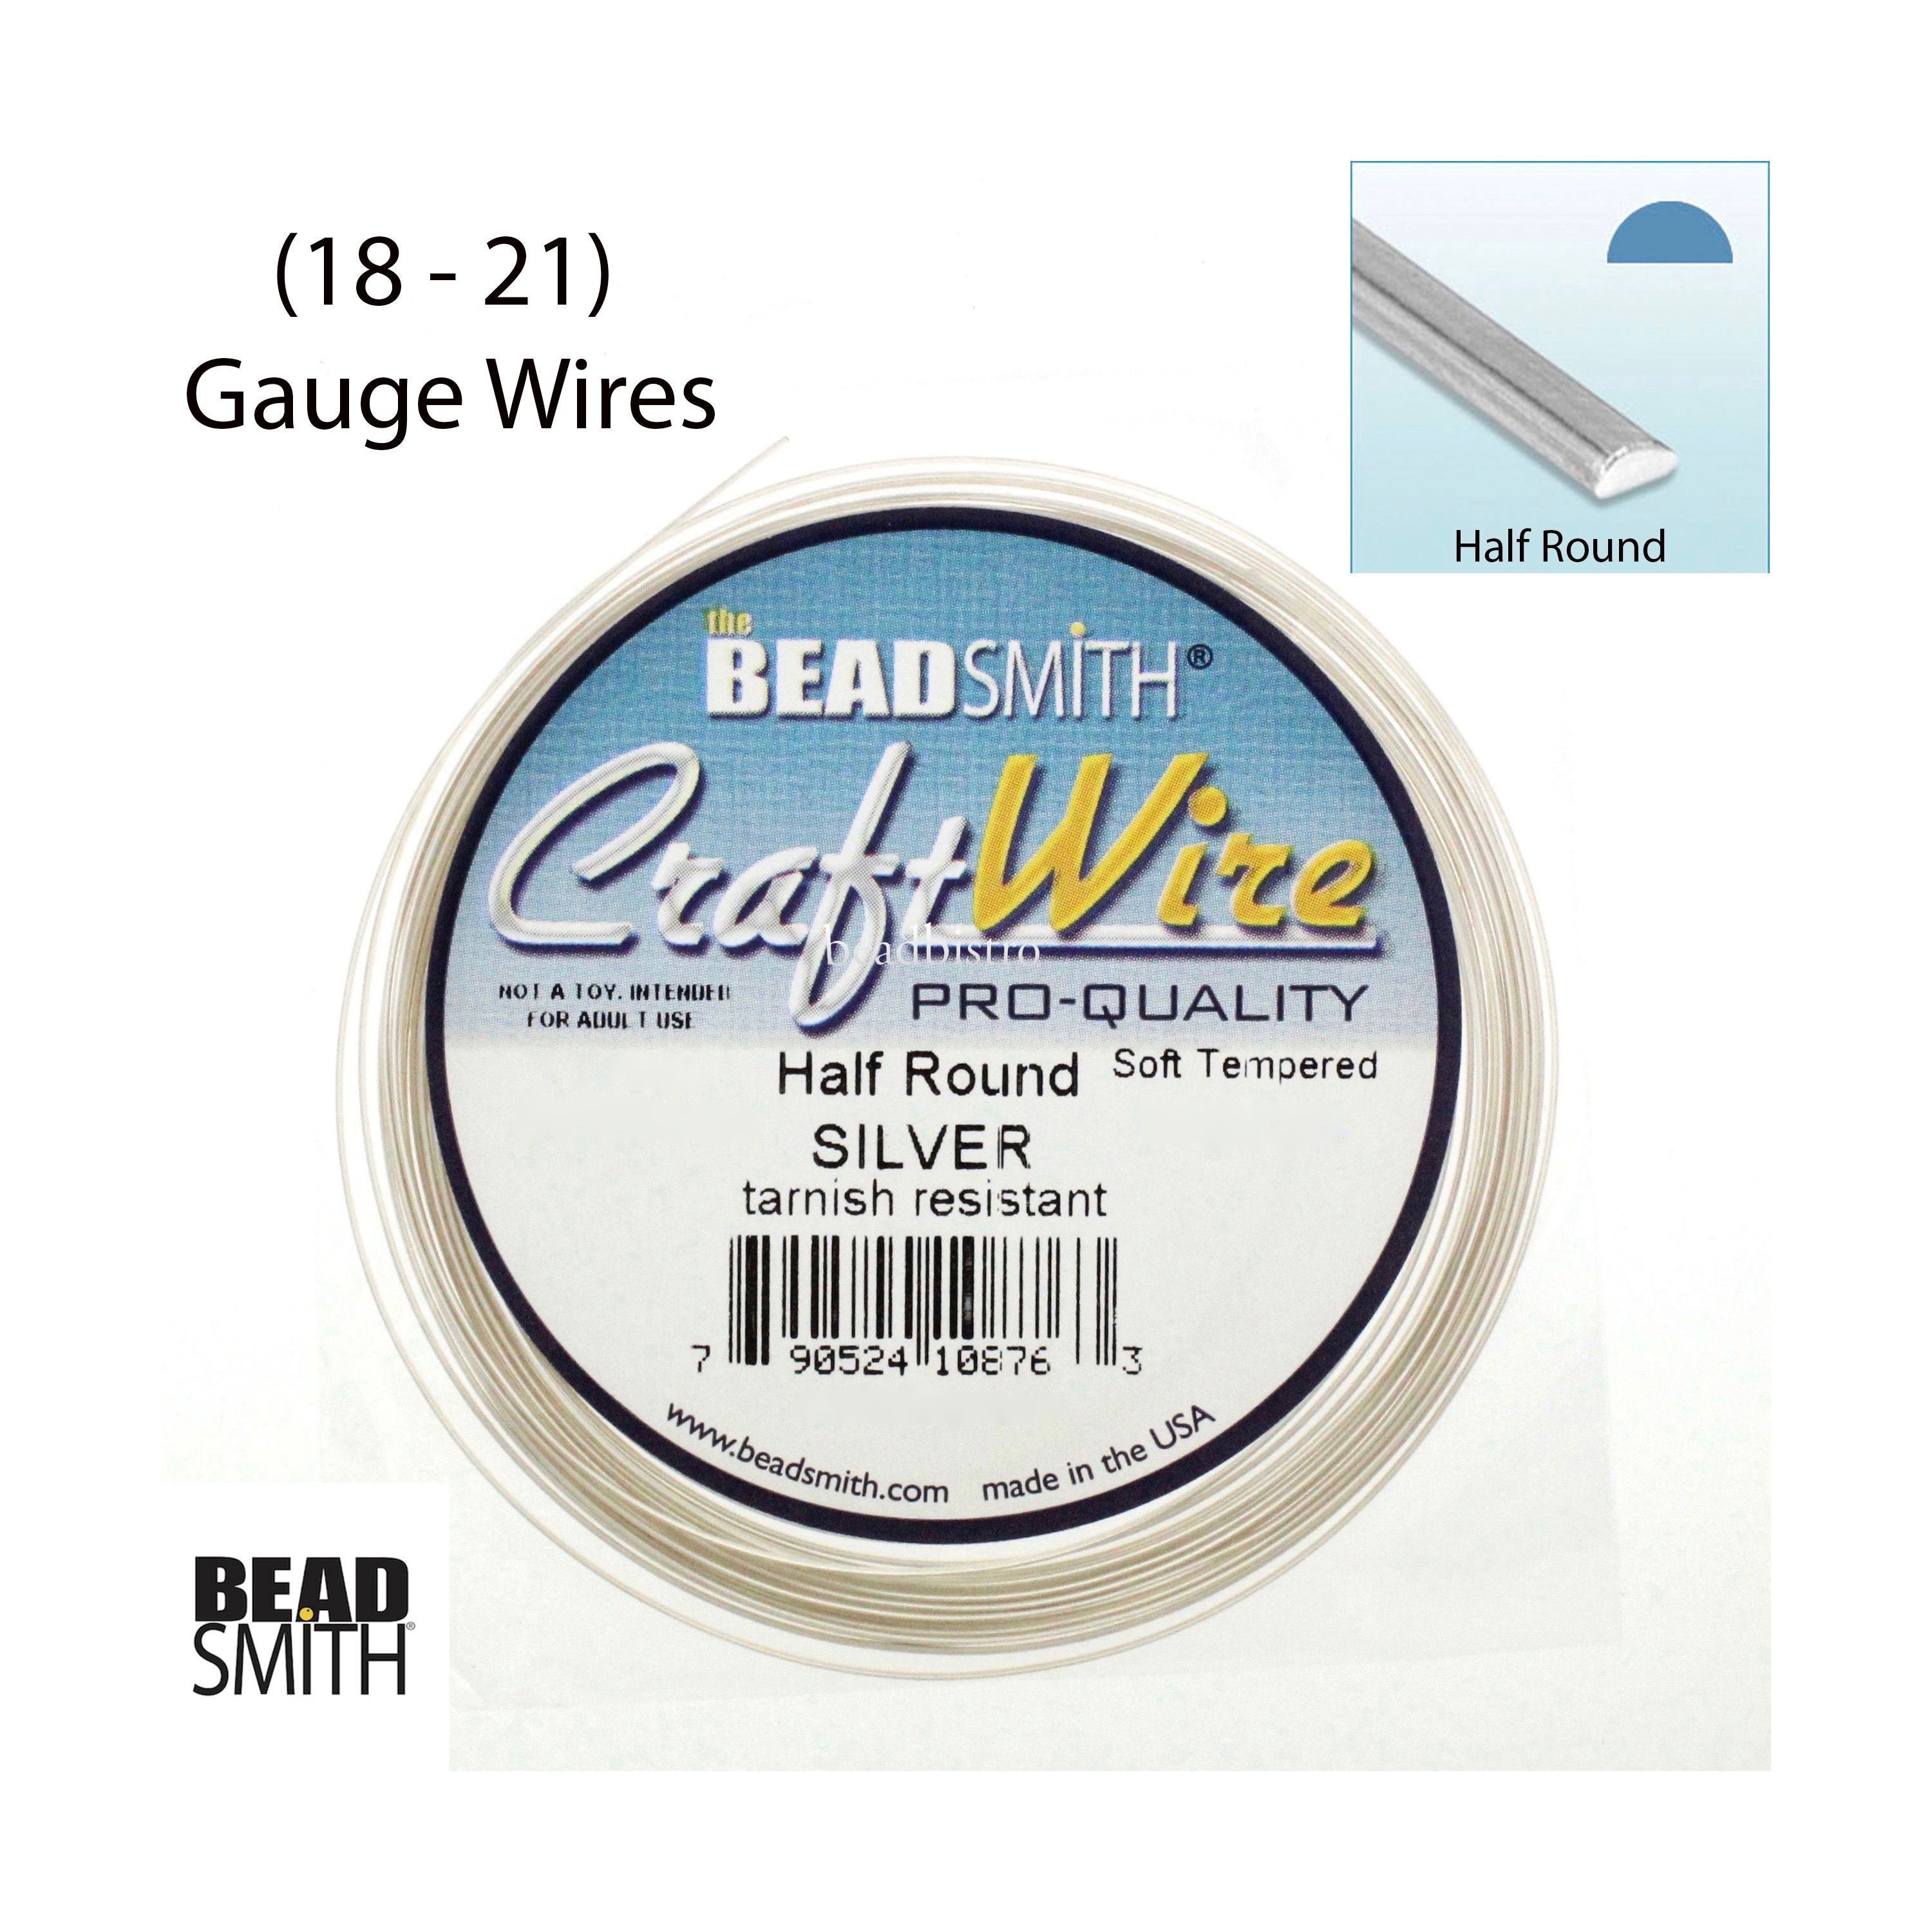 Copper Wire, 14 Gauge, HALF ROUND, Dead Soft, Solid Copper Wire, Jewelry  Quality Wire, Jewelry Wire Wrapping, Sold in 10 Ft. Increments, 025 